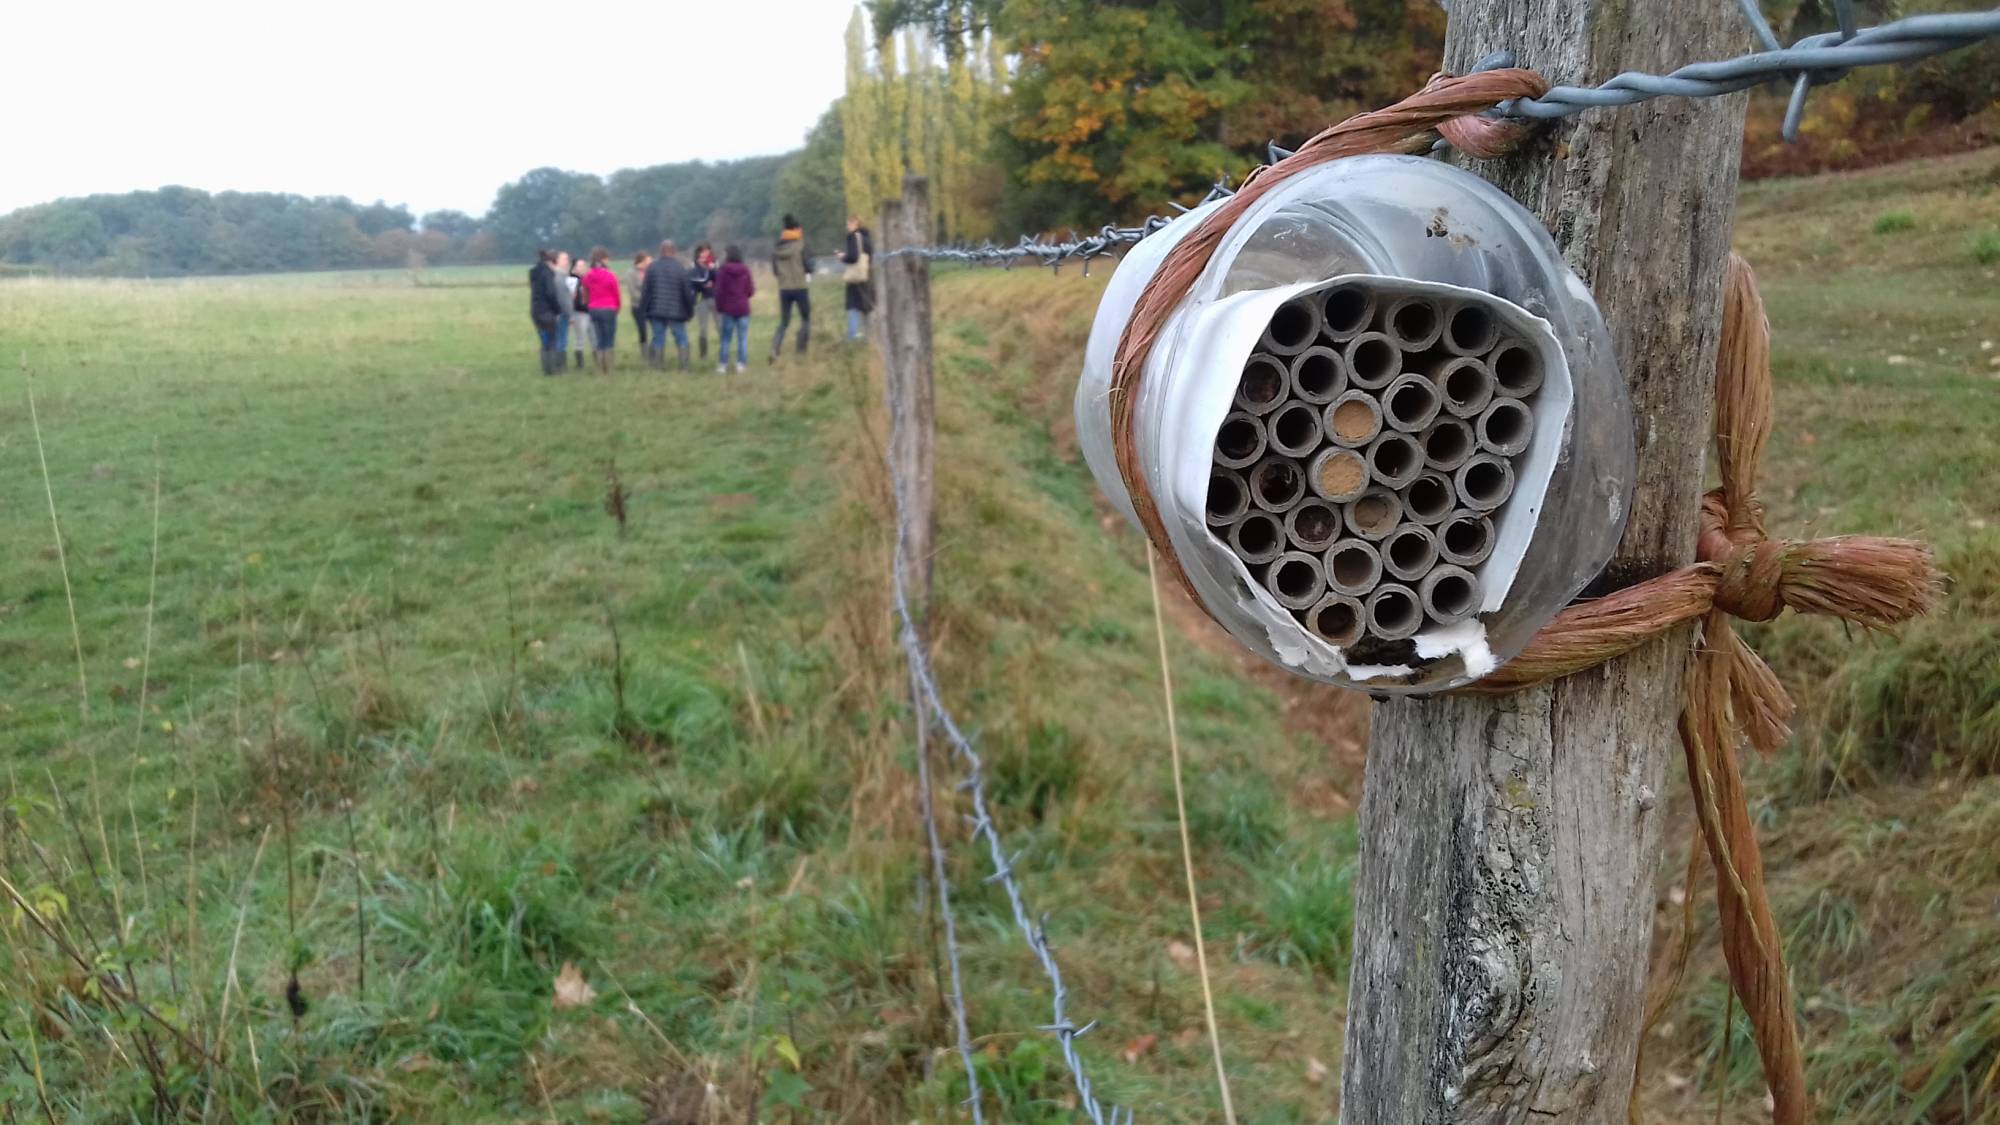 In the foreground, a nesting box for wild bees, which allows to follow the reproduction of these bees by counting the number of occupied tubes (=clogged, here by earth).